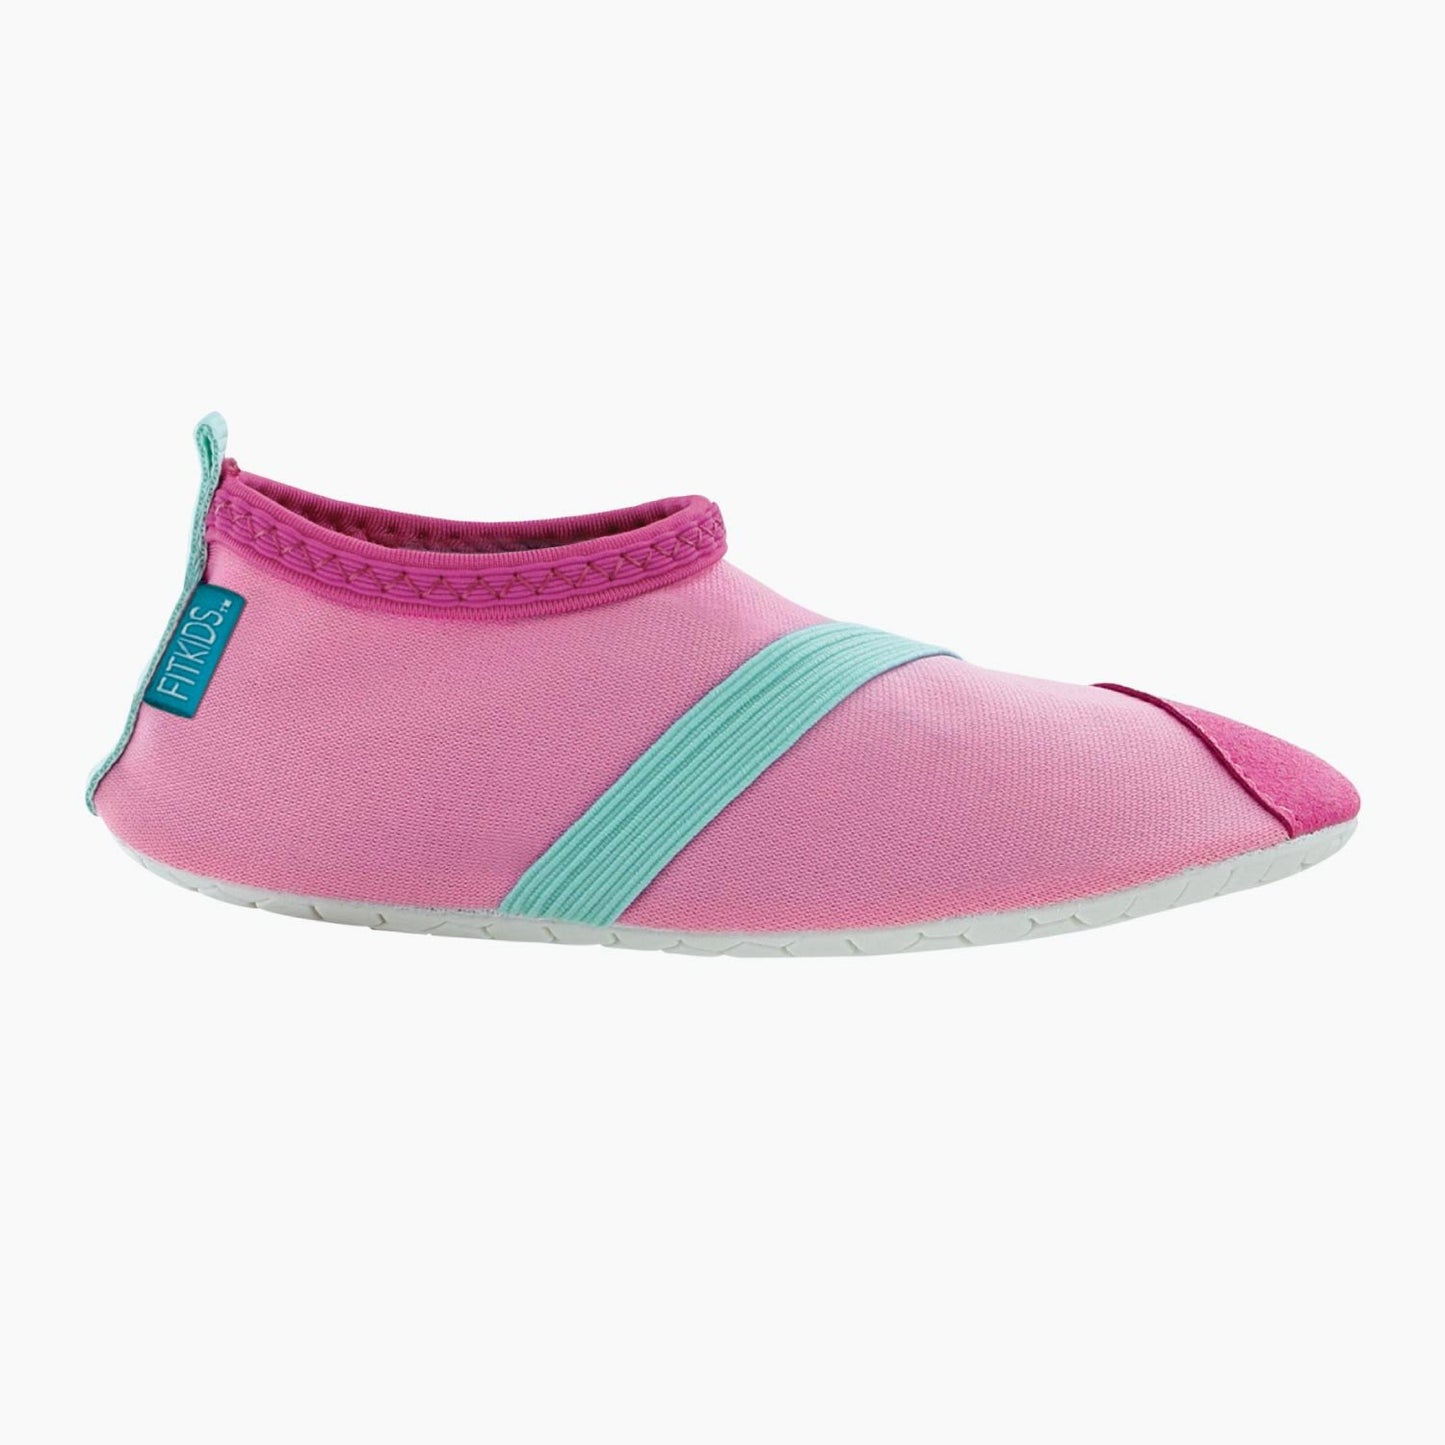 FitKids Shoes